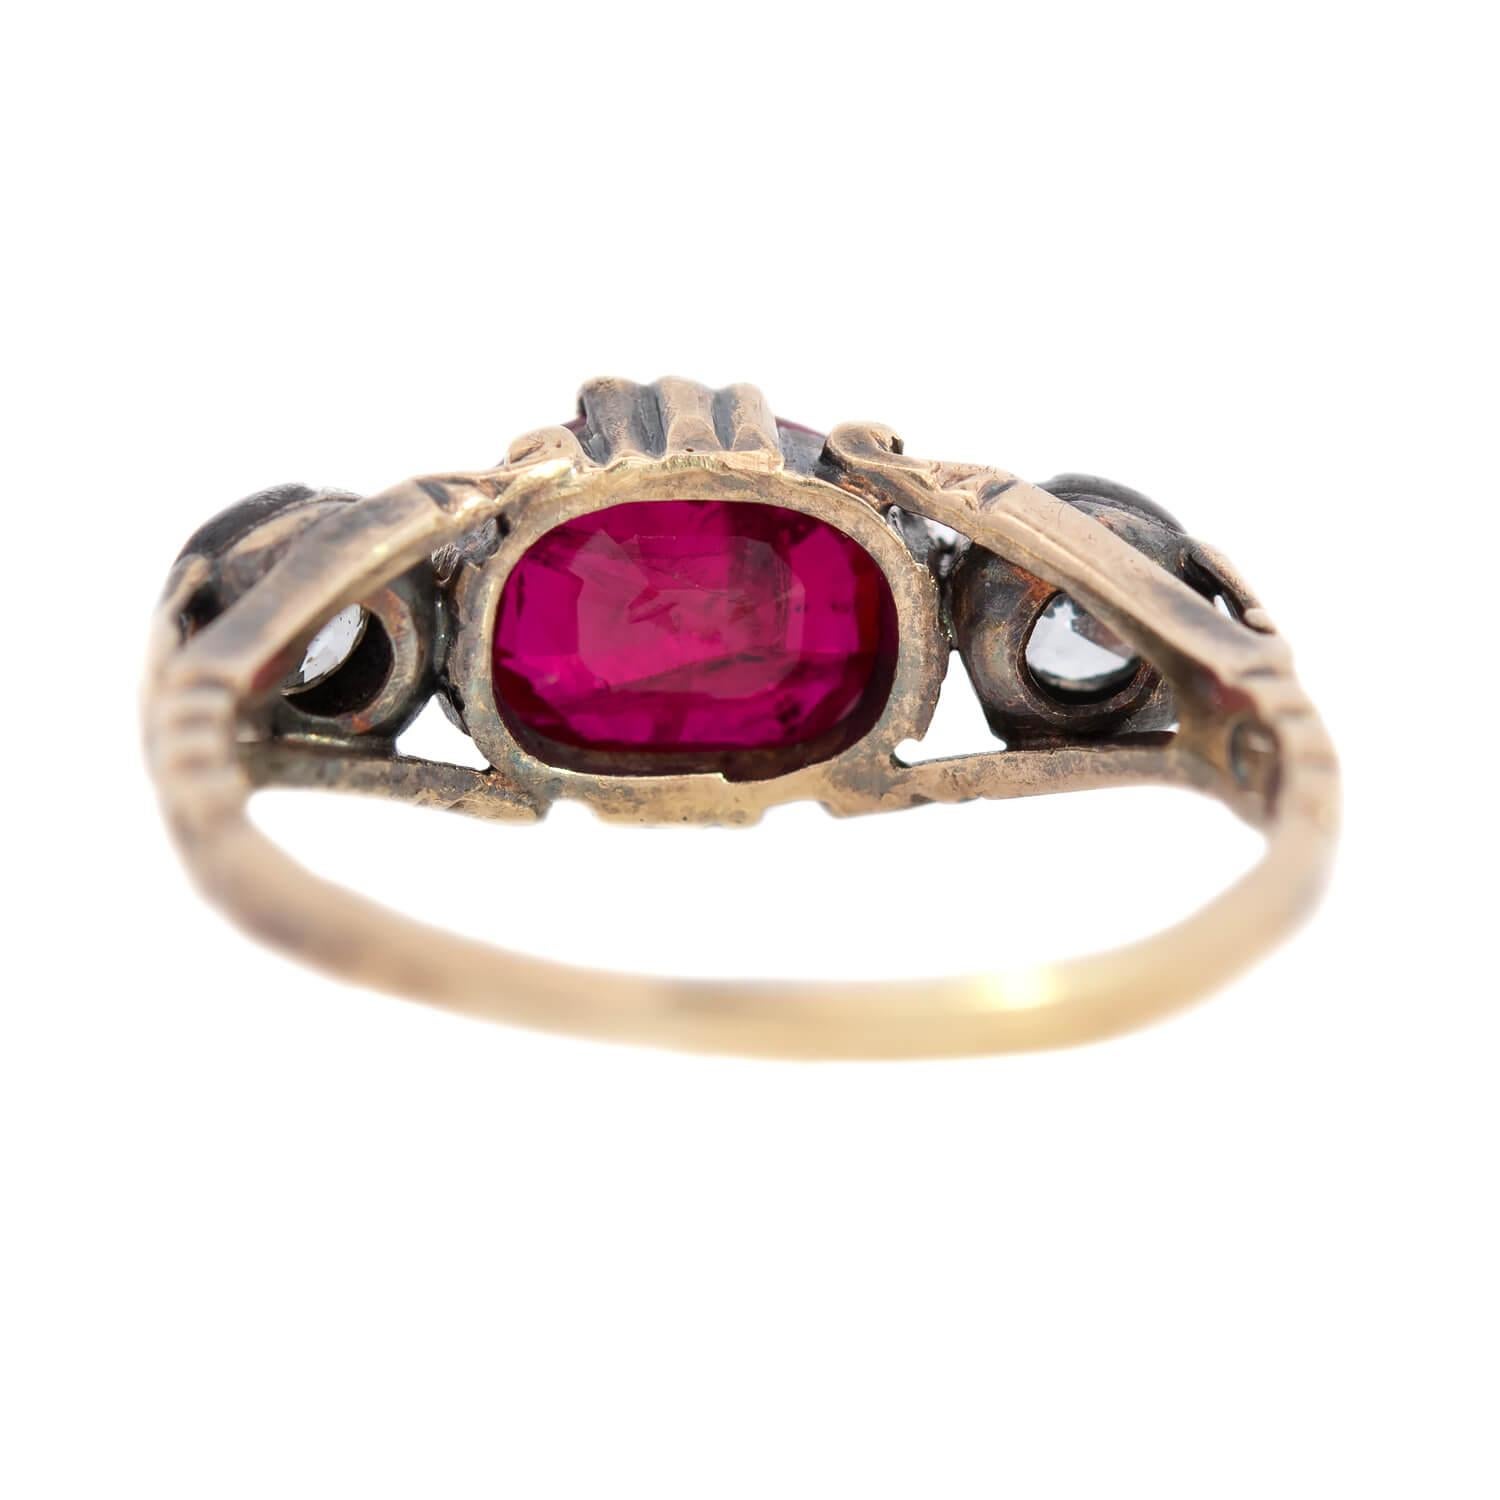 Antique Cushion Cut Late Victorian 14k/Sterling Silver Ruby and Diamond Engagement Ring 1.50ct